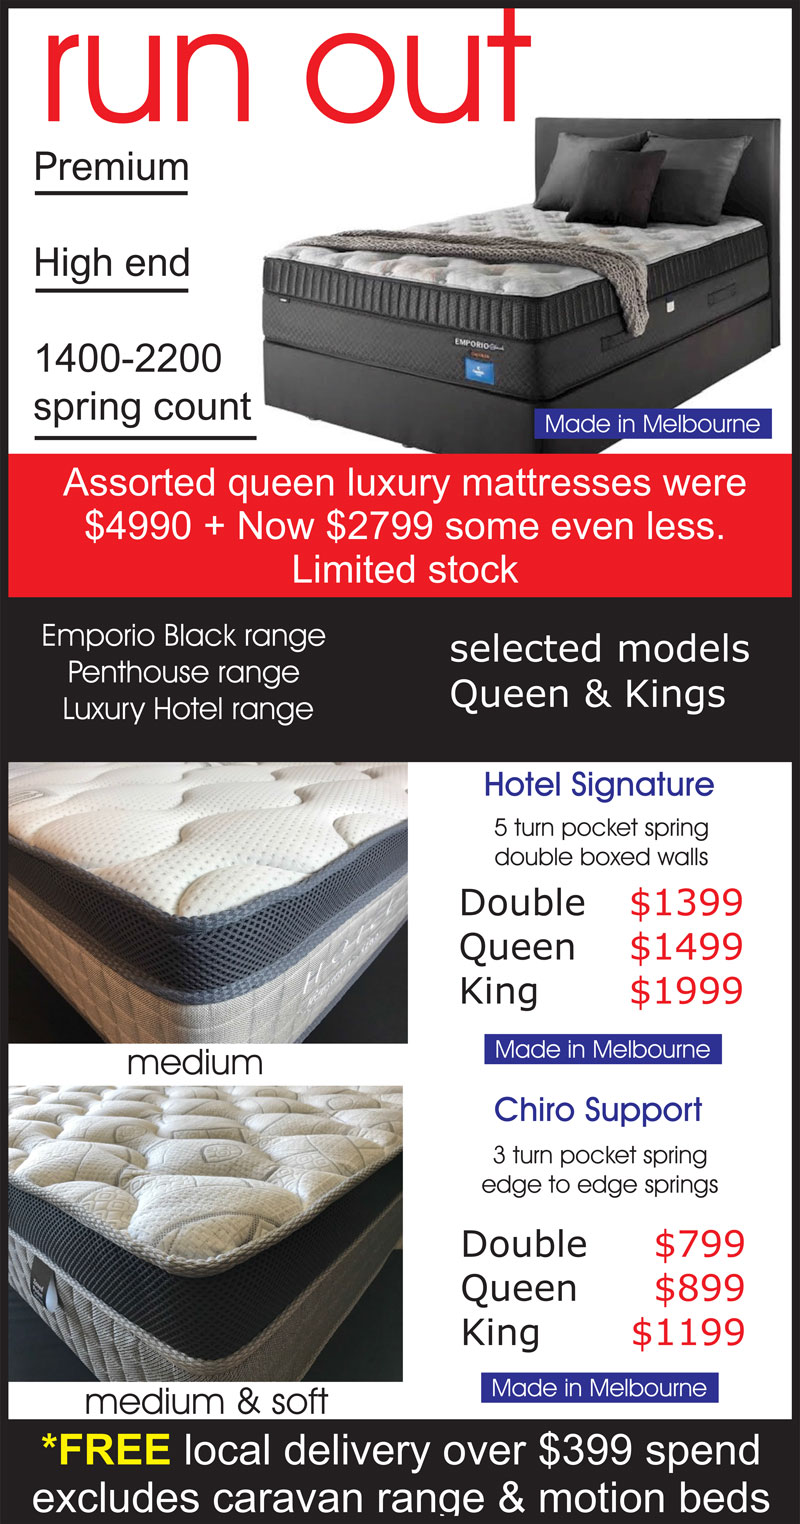 Mattresses Direct To Public Run Out Sale - Huge Savings on Australian Made Mattresses including Selected King And Queen Luxury Hotel Mattresses. Hotel Signature and Chiro Support Mattresses.